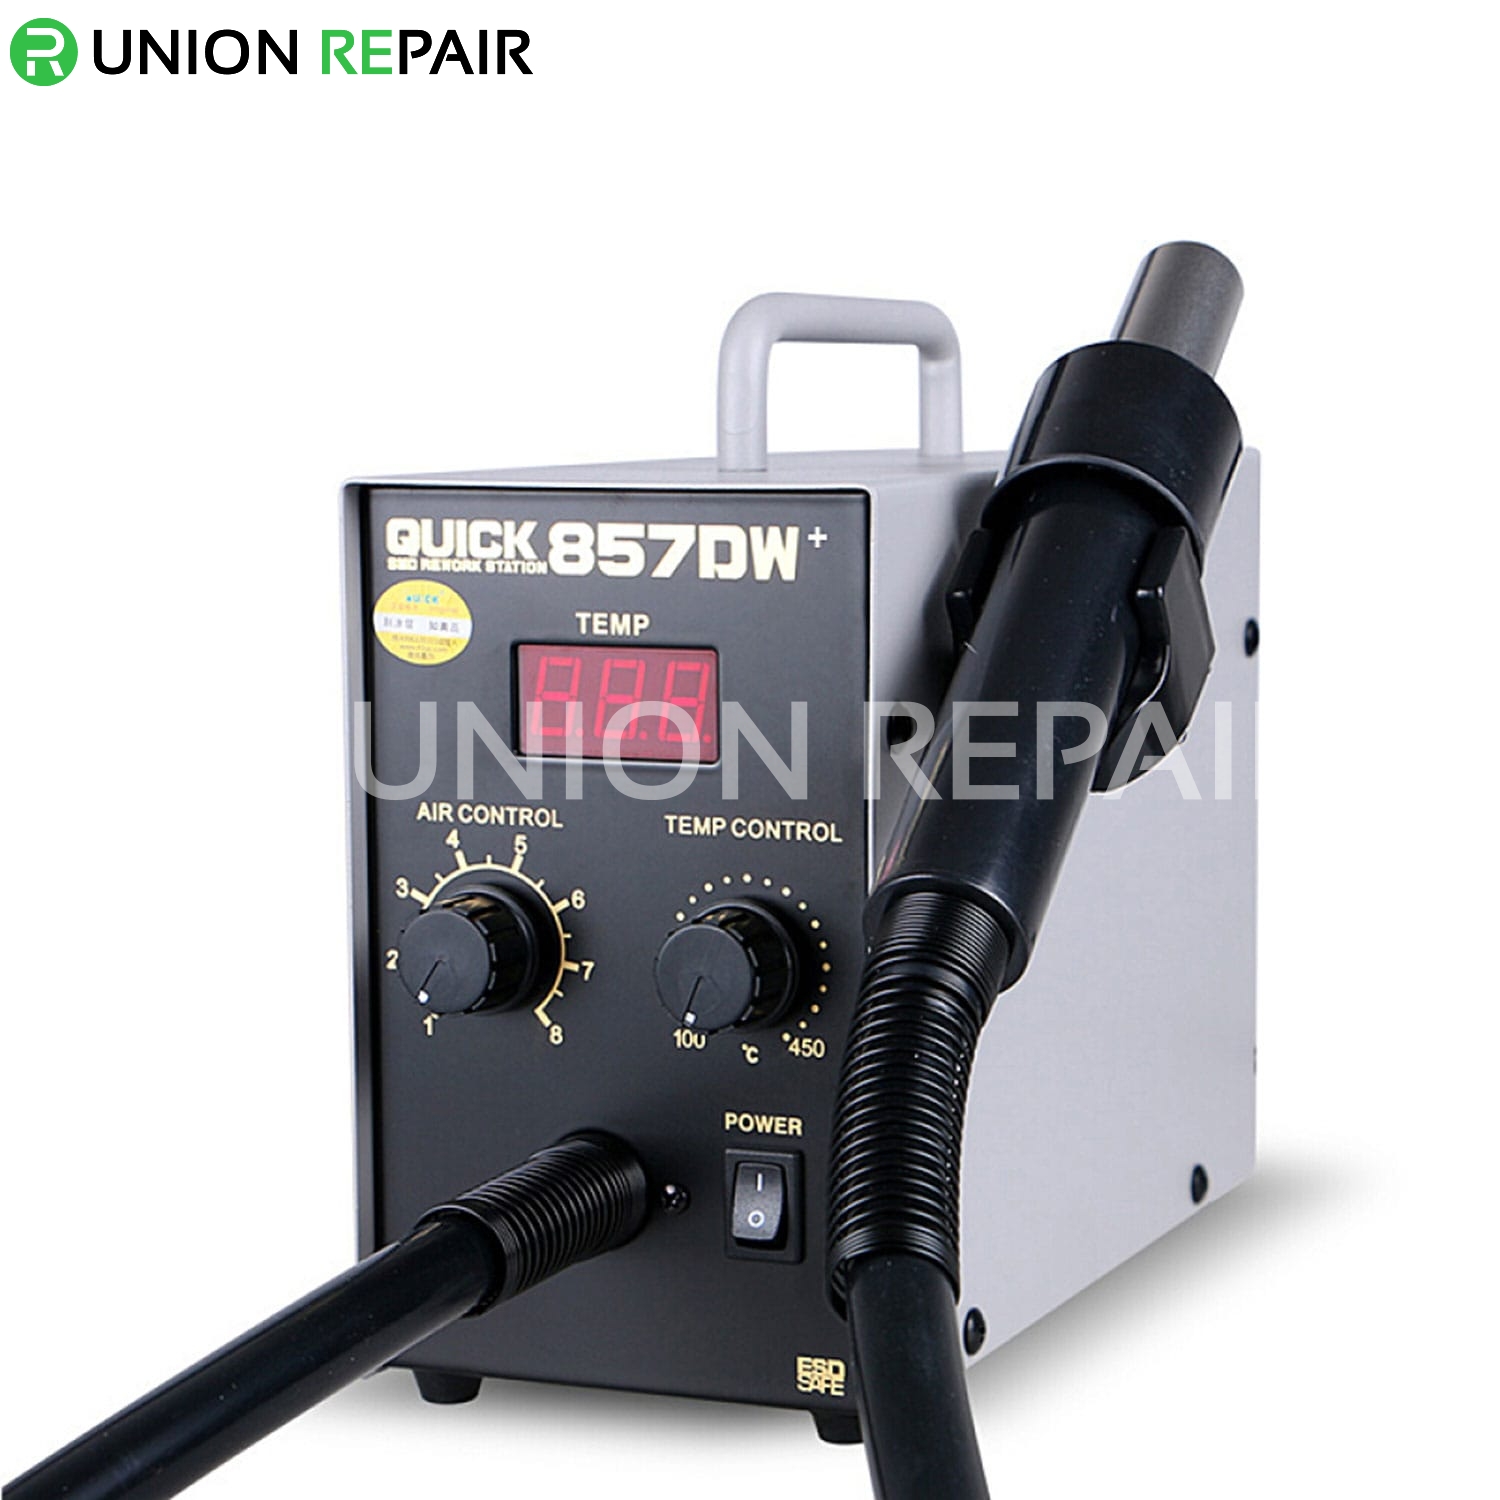 QUICK 857DW+ Lead Free Adjustable Hot Air Heat Gun With Helical Wind Rework Soldering Station 220V